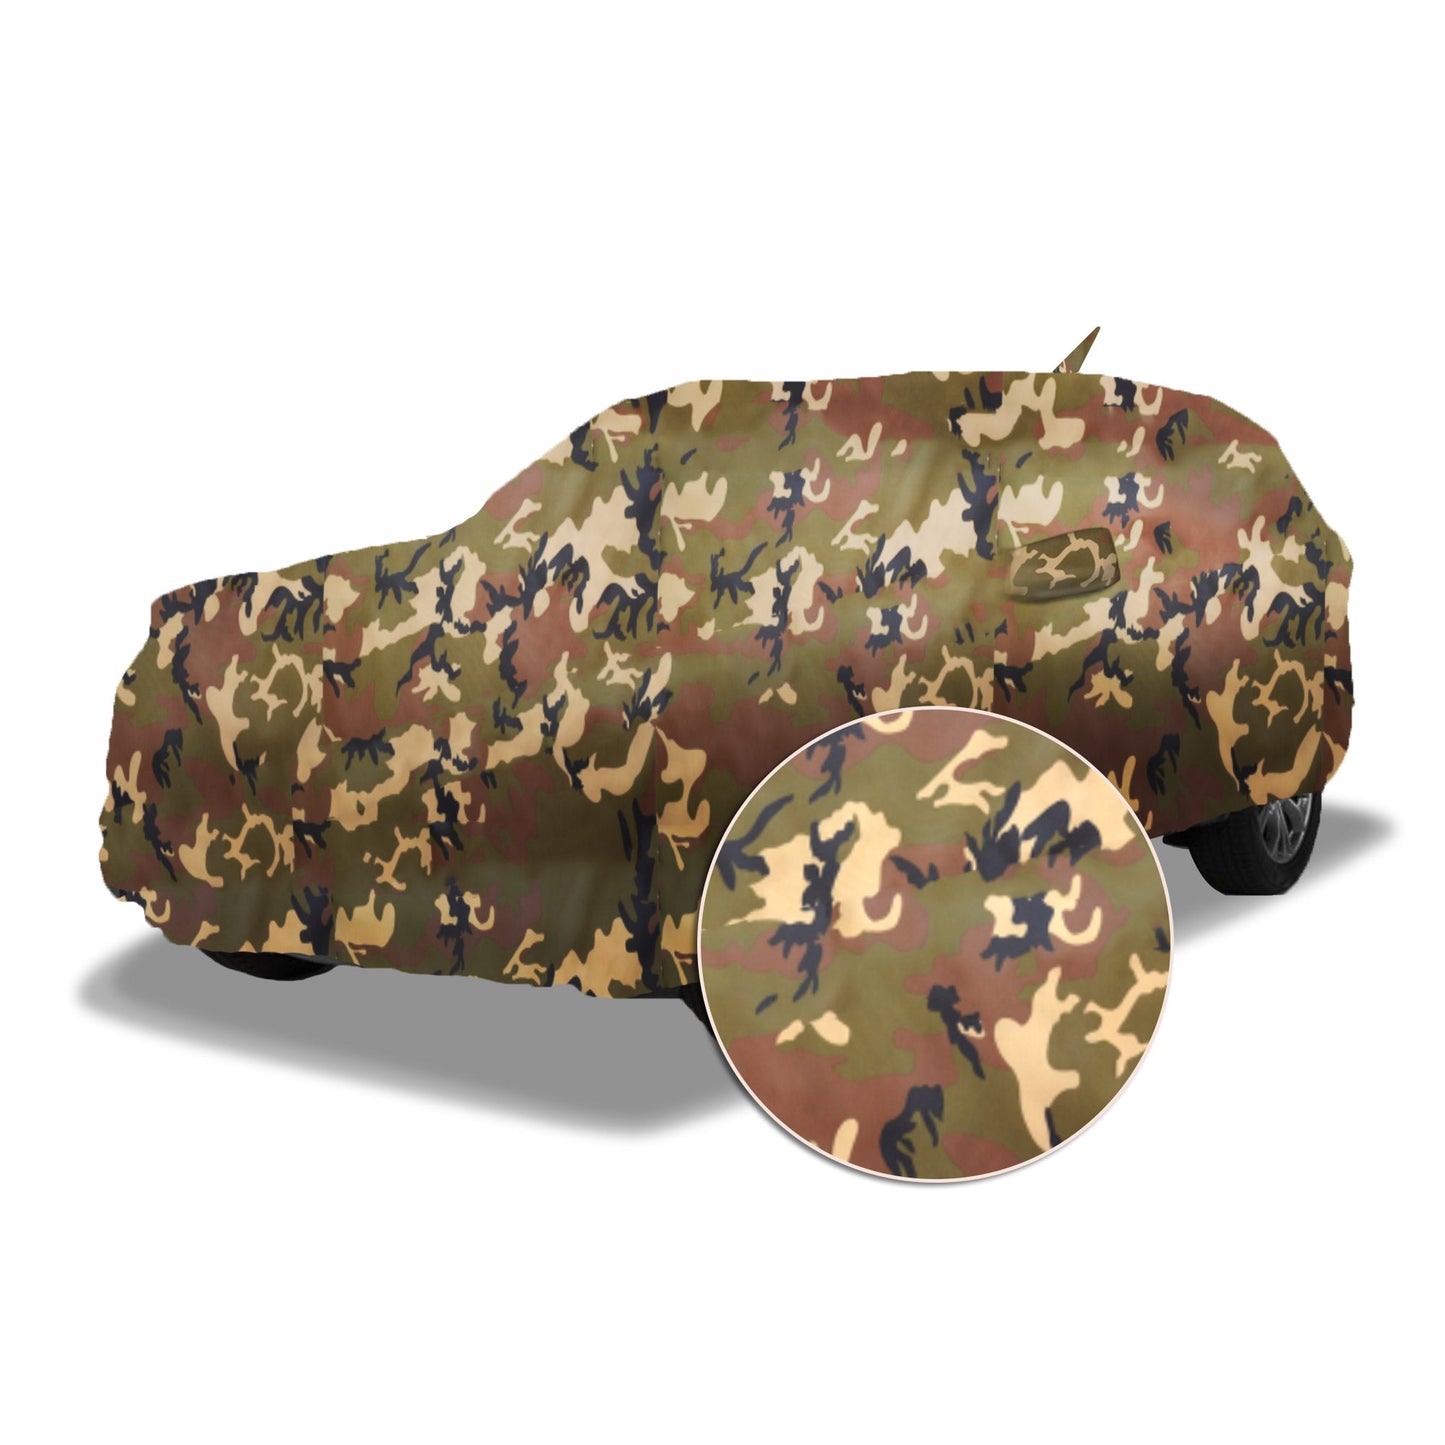 Ascot Tata Nexon EV / Tata Nexon EV Facelift Car Body Cover Extra Strong & Dust Proof Jungle Military Car Cover with UV Proof & Water-Resistant Coating